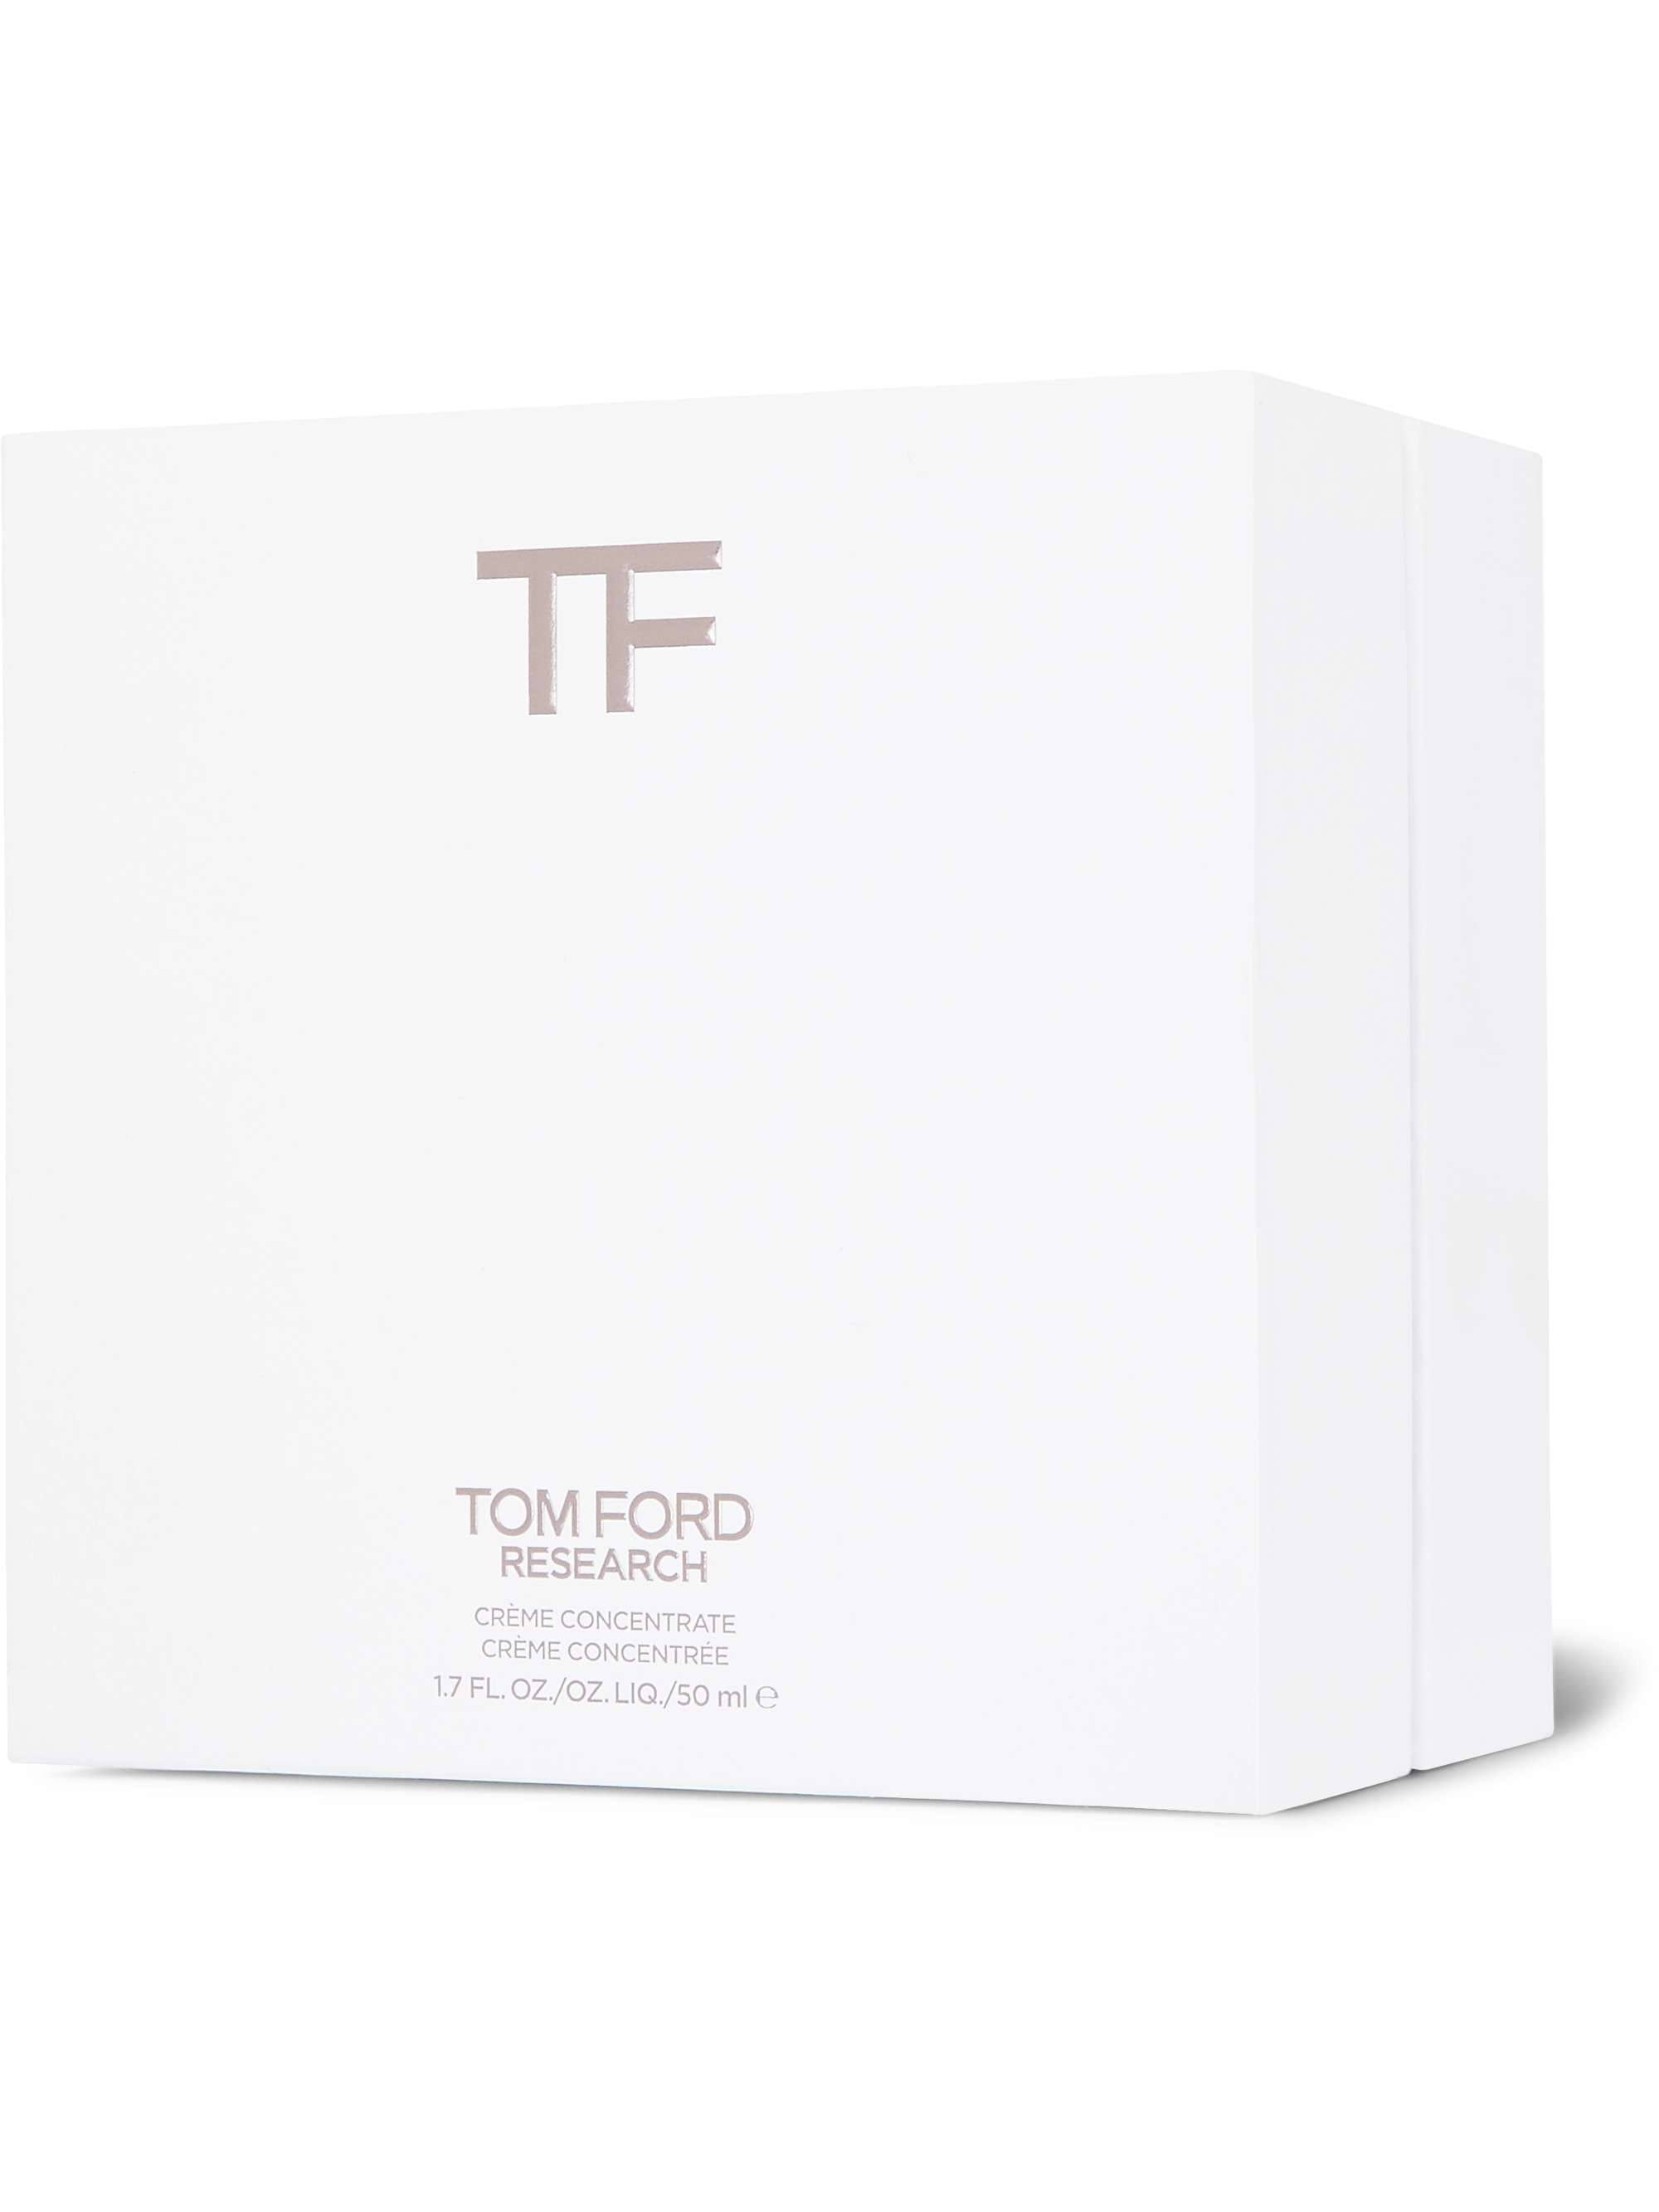 TOM FORD BEAUTY Research Crème Concentrate, 50ml